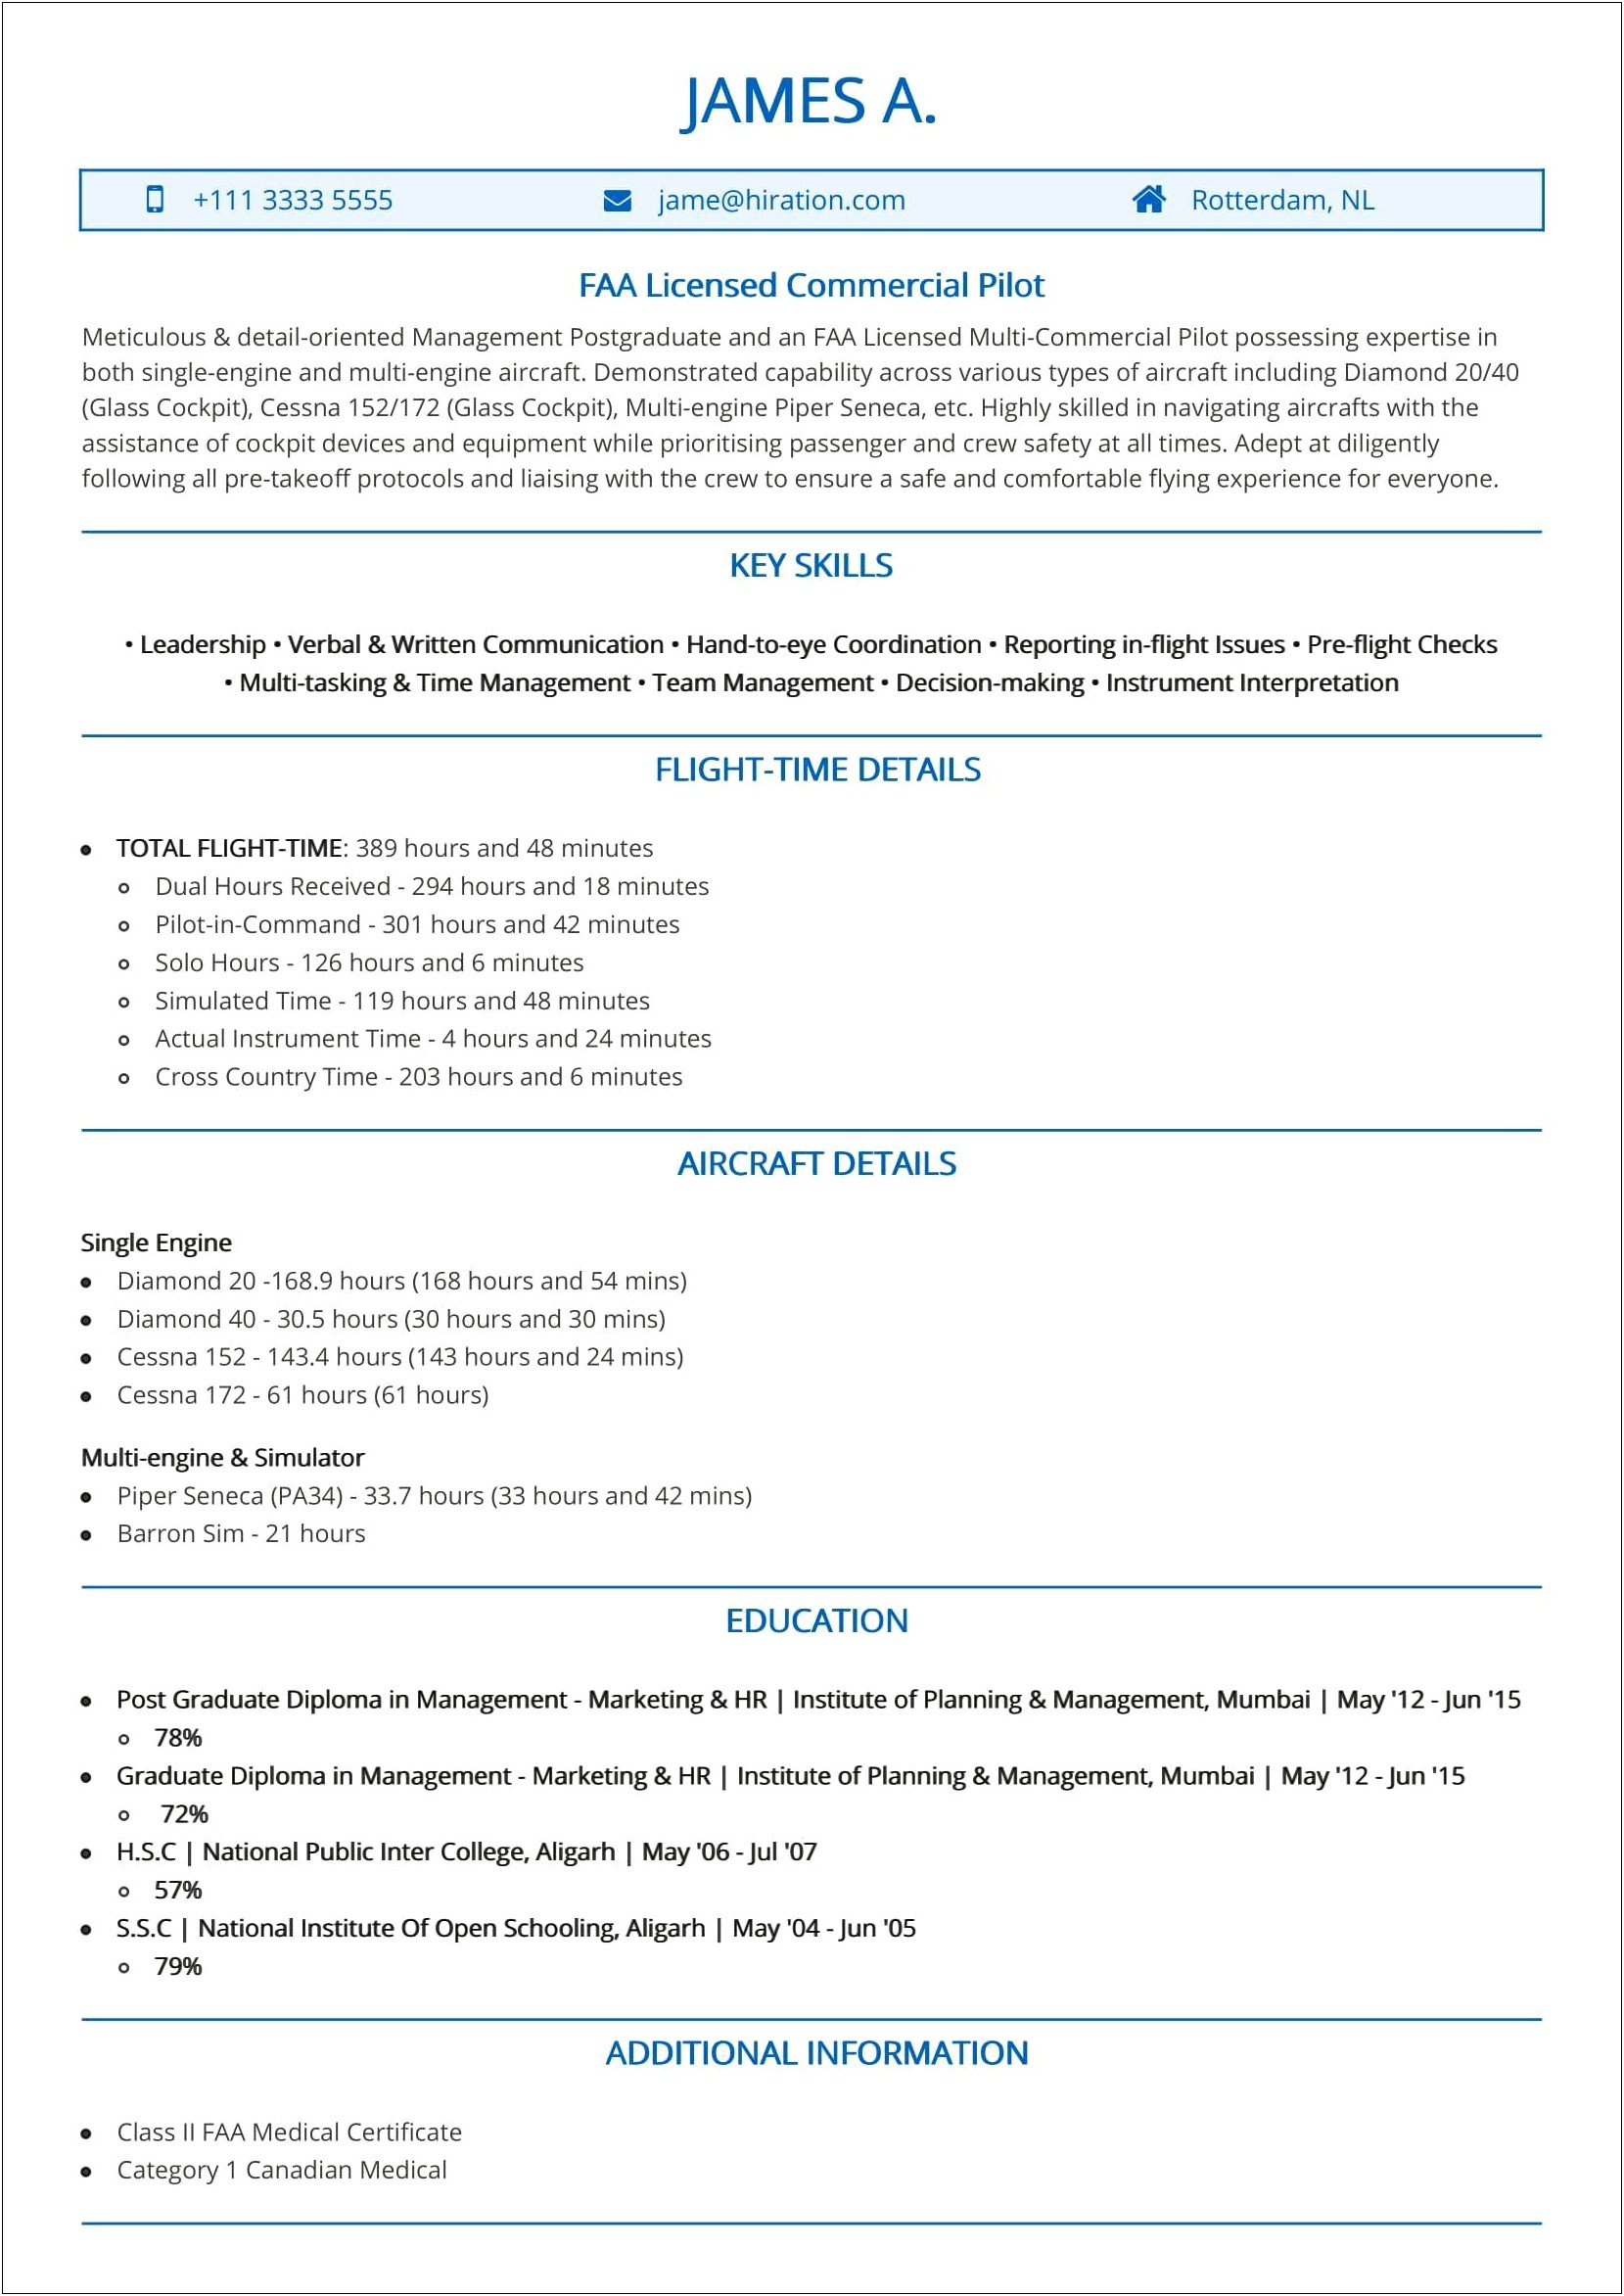 Resume Examples For Little Work Experience